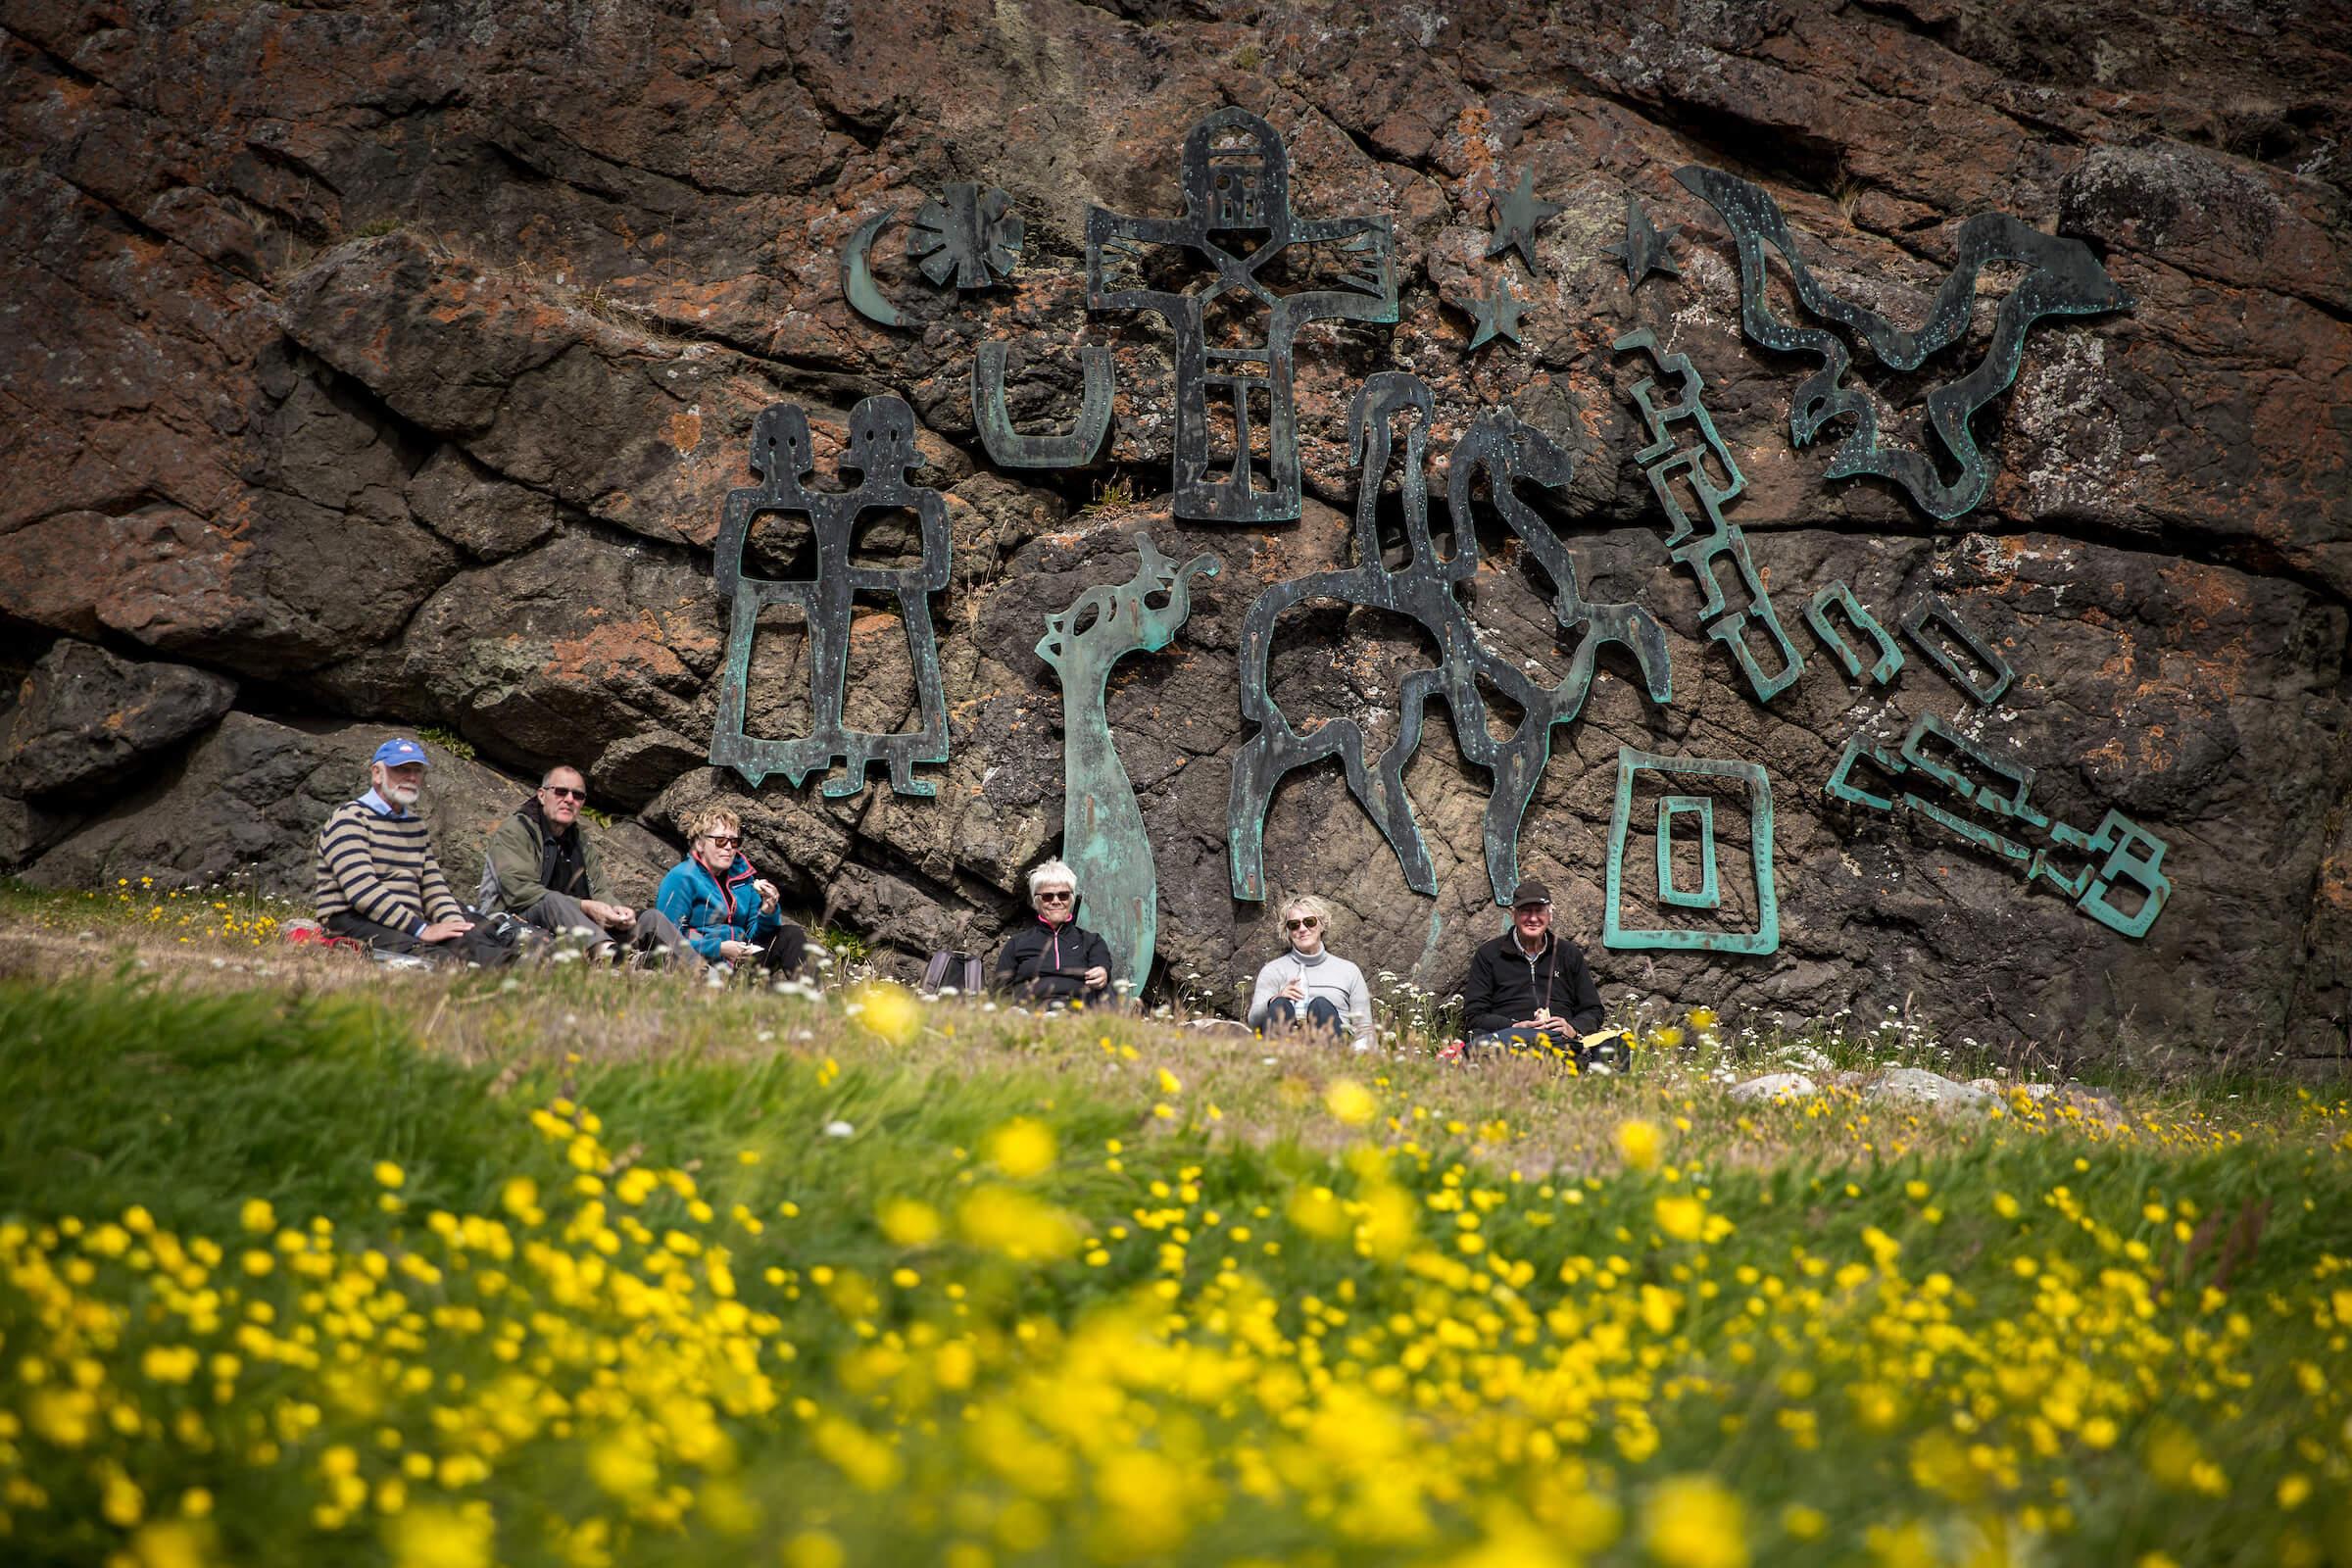 A group of travelers having lunch in front of the Sven Havsteen Mikkelsen artwork in Qassiarsuk. By Mads Pihl - Visit Greenland